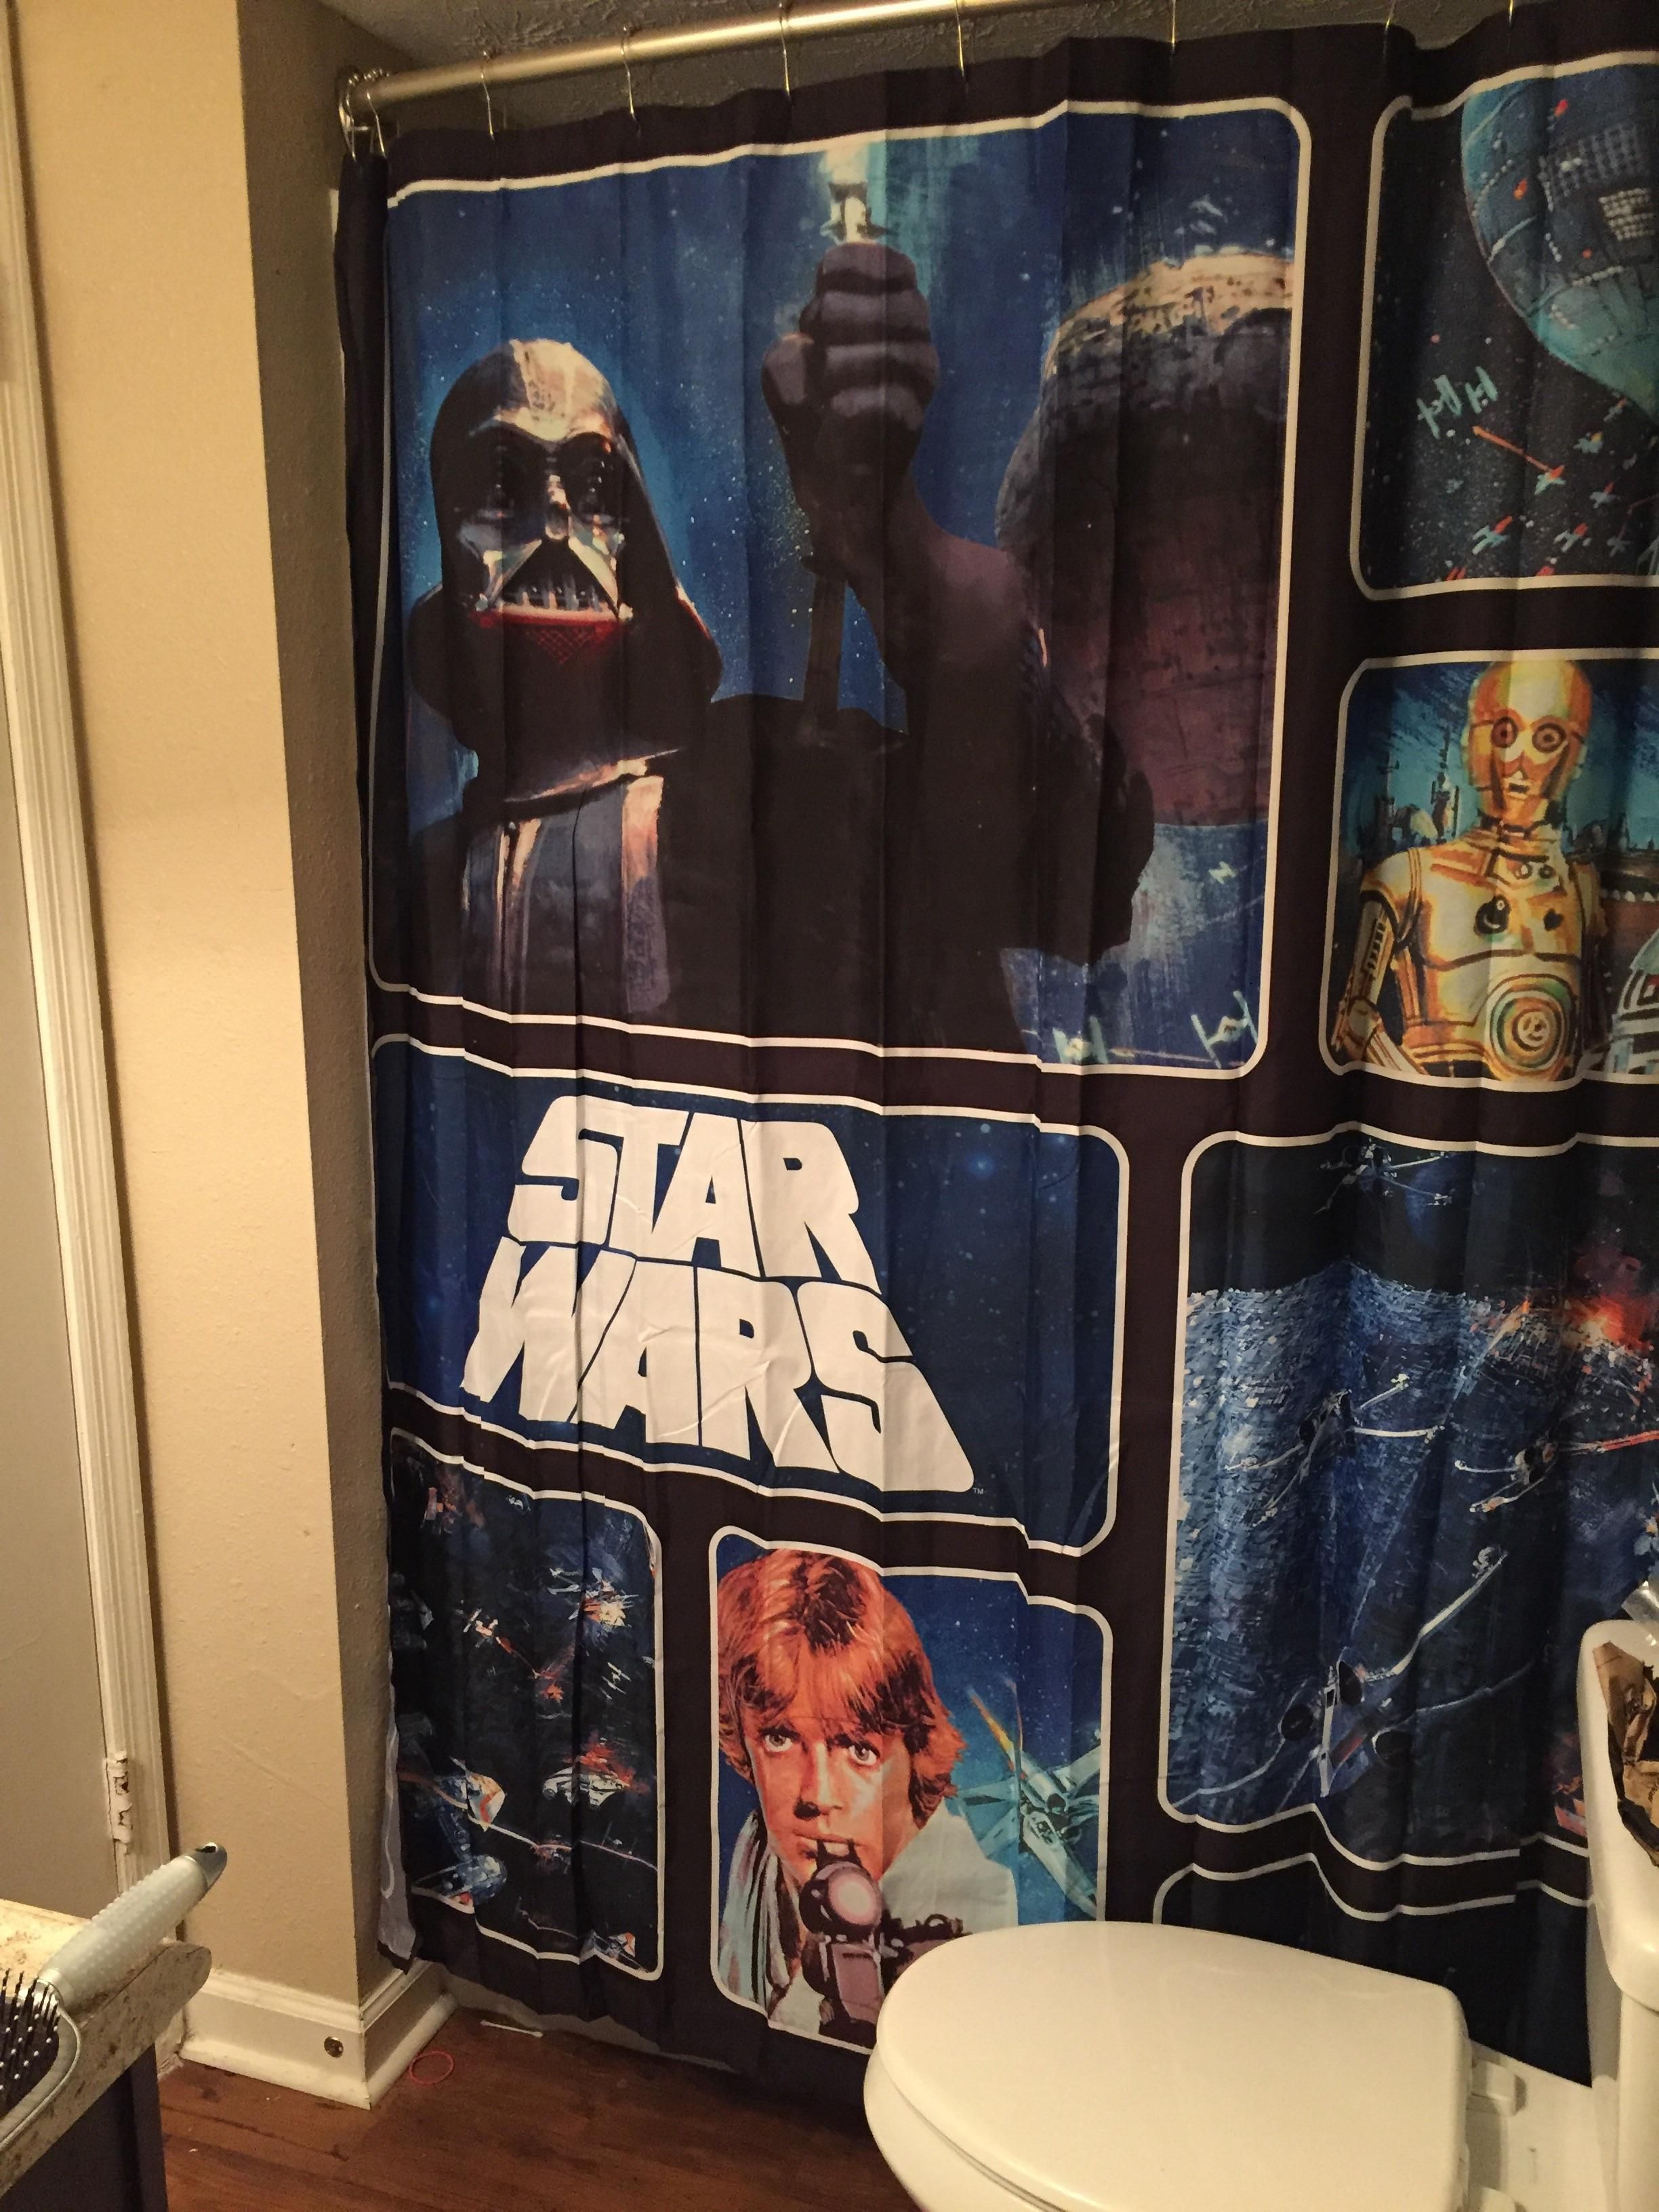 Girlfriend said "go get a new shower curtain before my mom arrives." I think this is fair.